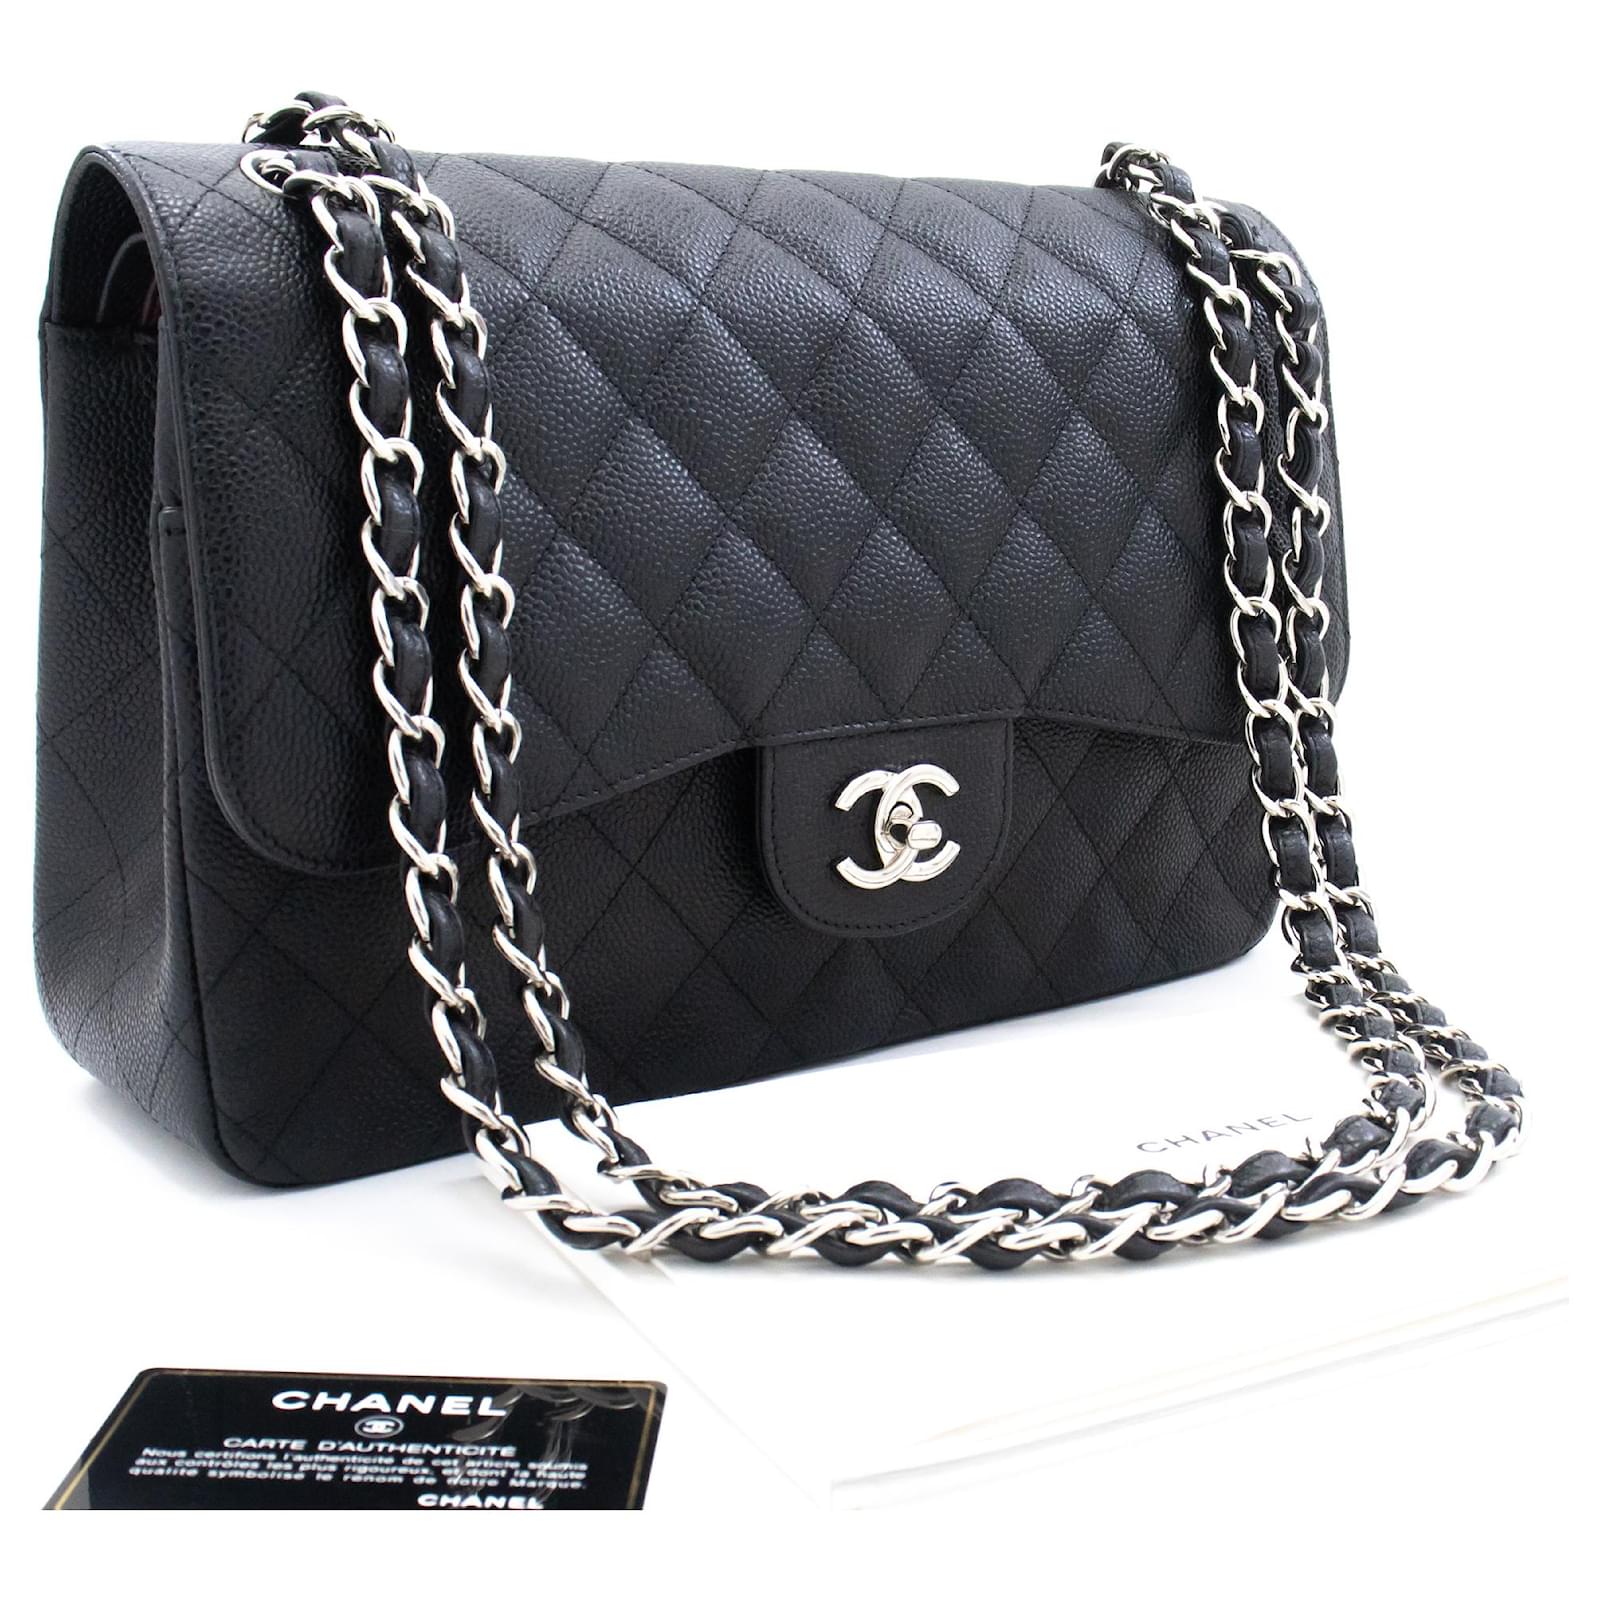 Handbags Chanel Chanel 11 Large Grained Calf Leather Lined Flap Chain Shoulder Bag